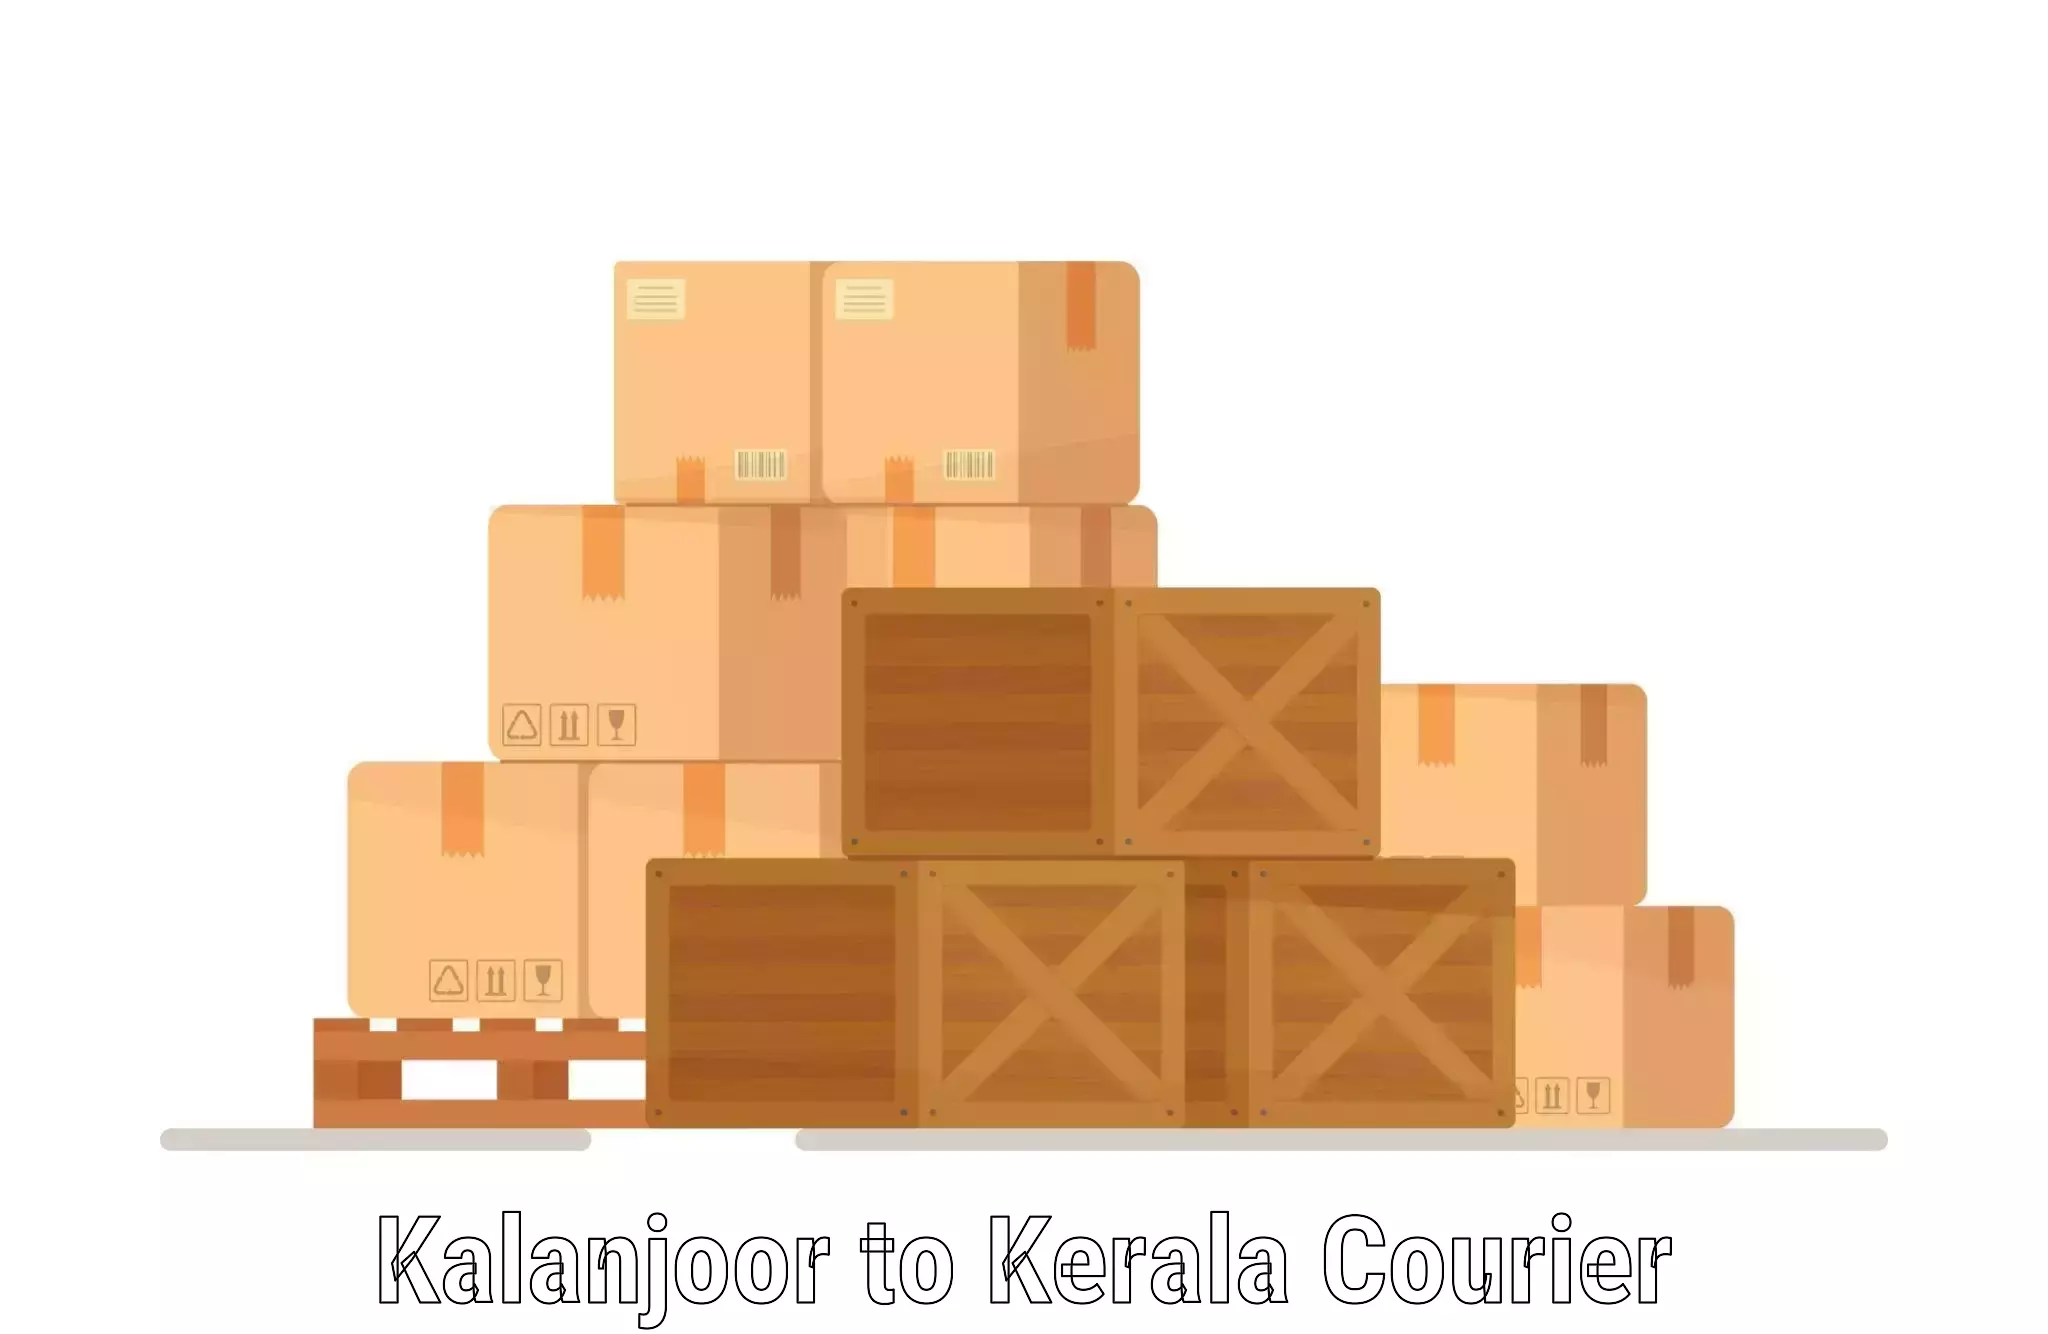 High-speed parcel service Kalanjoor to Angamaly